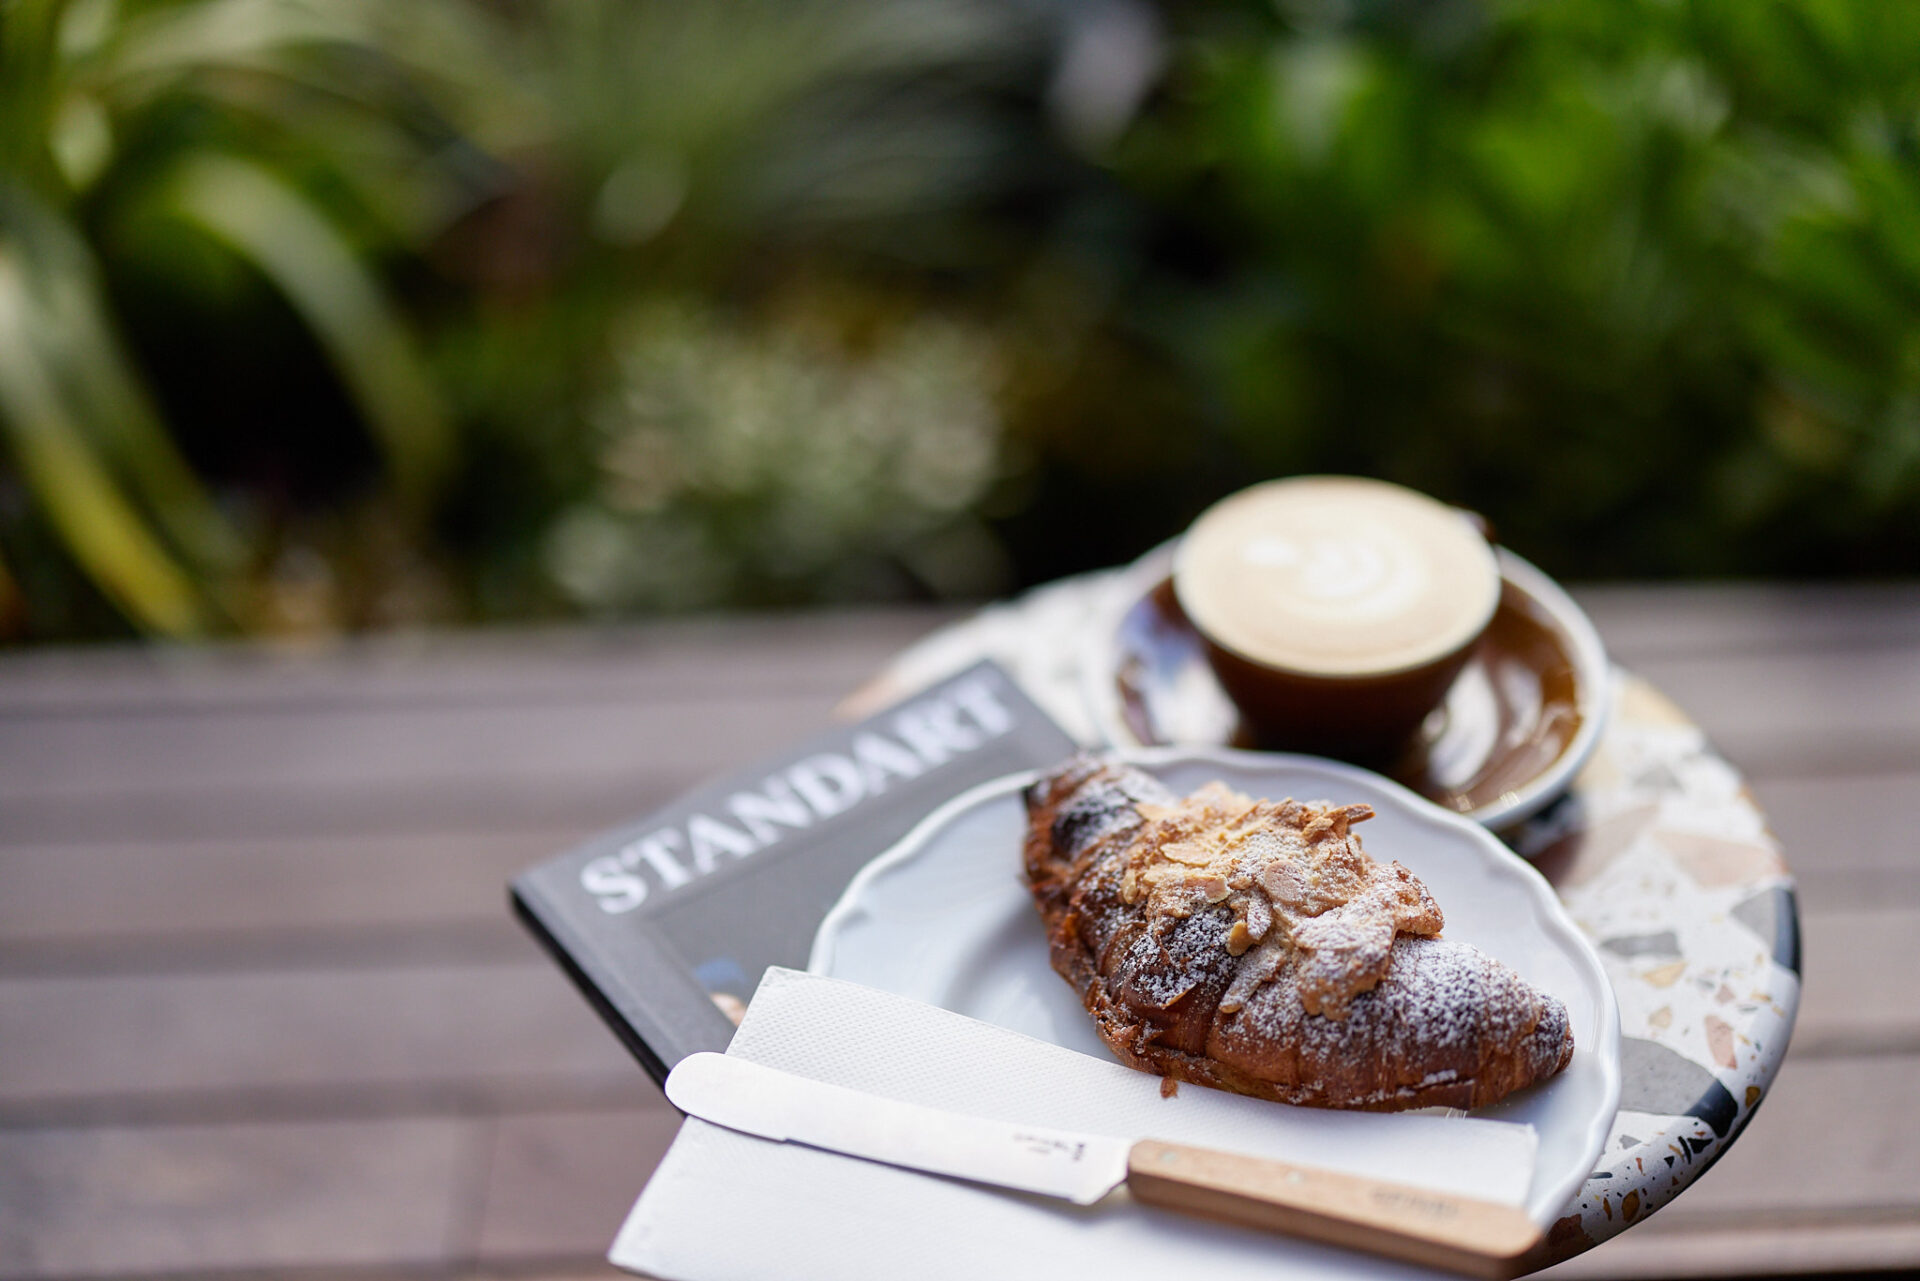 Almond Croissant on small white plate, with coffee and magazine out of focus behind.